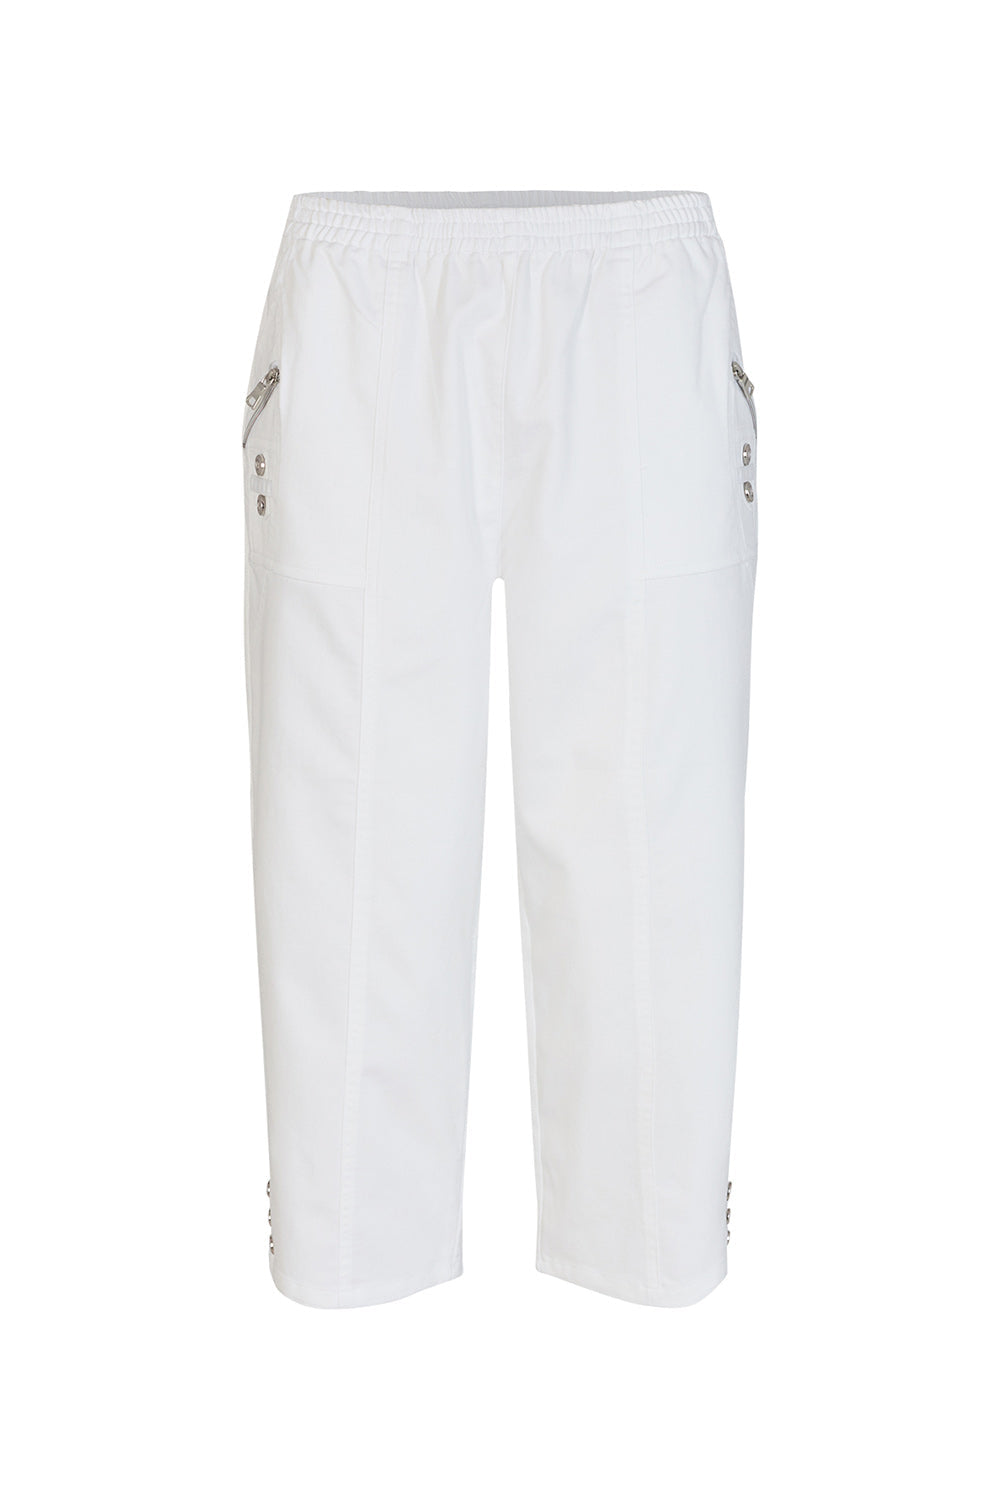 Soya Concept (17197) Women's Pull On Capris Pants With Button & Zipper Detail and Pockets in White